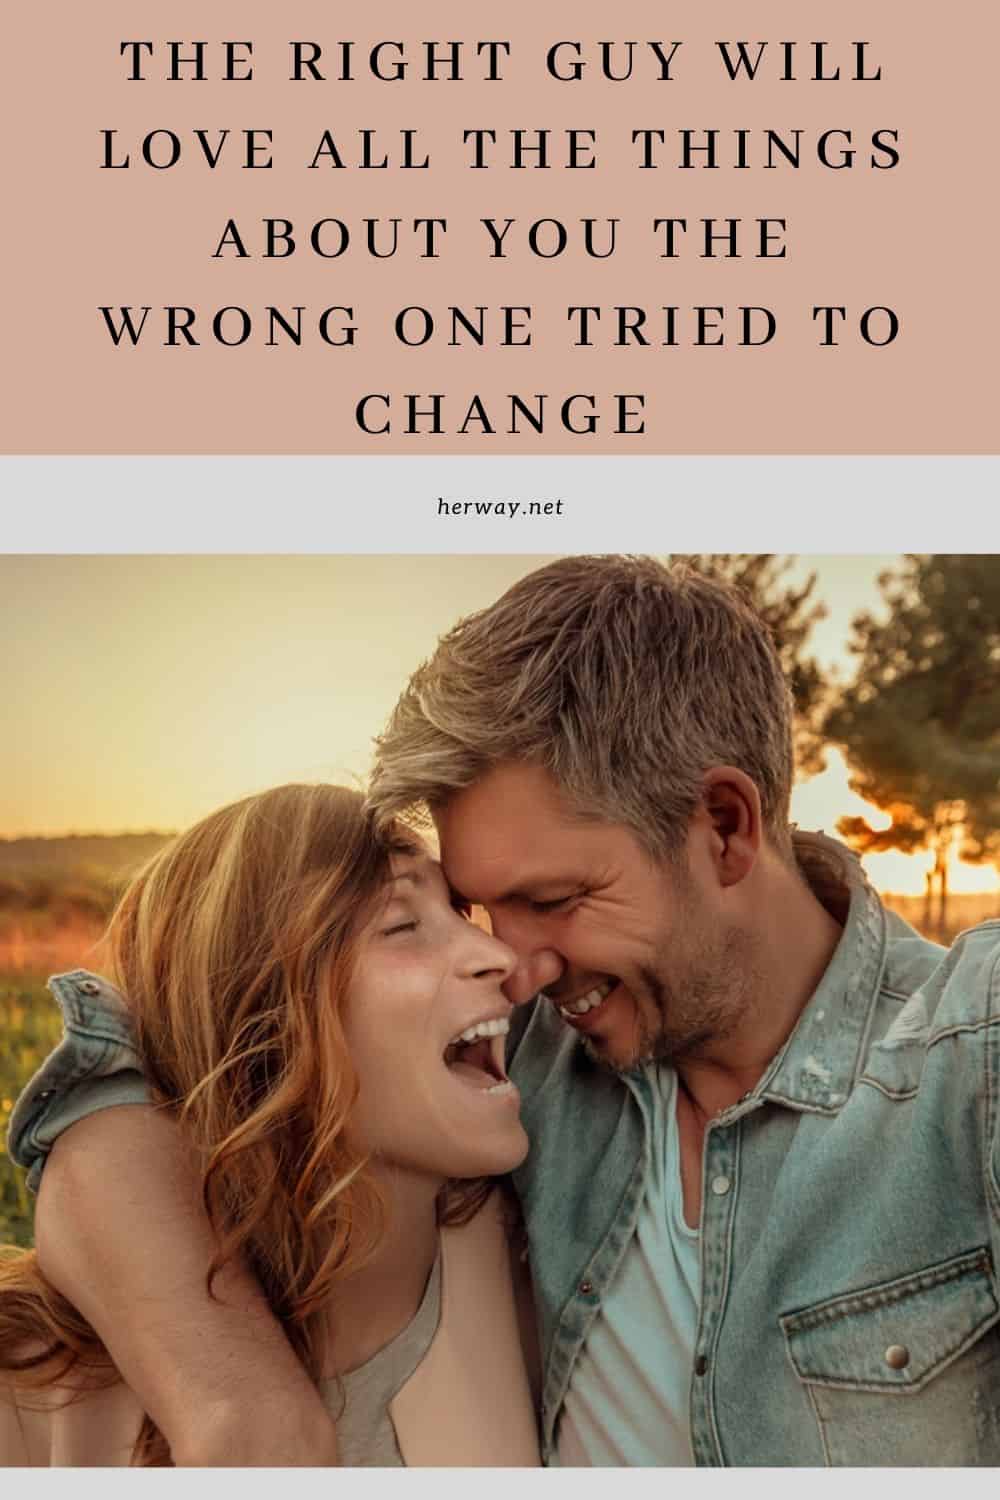 The Right Guy Will Love All The Things About You The Wrong One Tried To Change